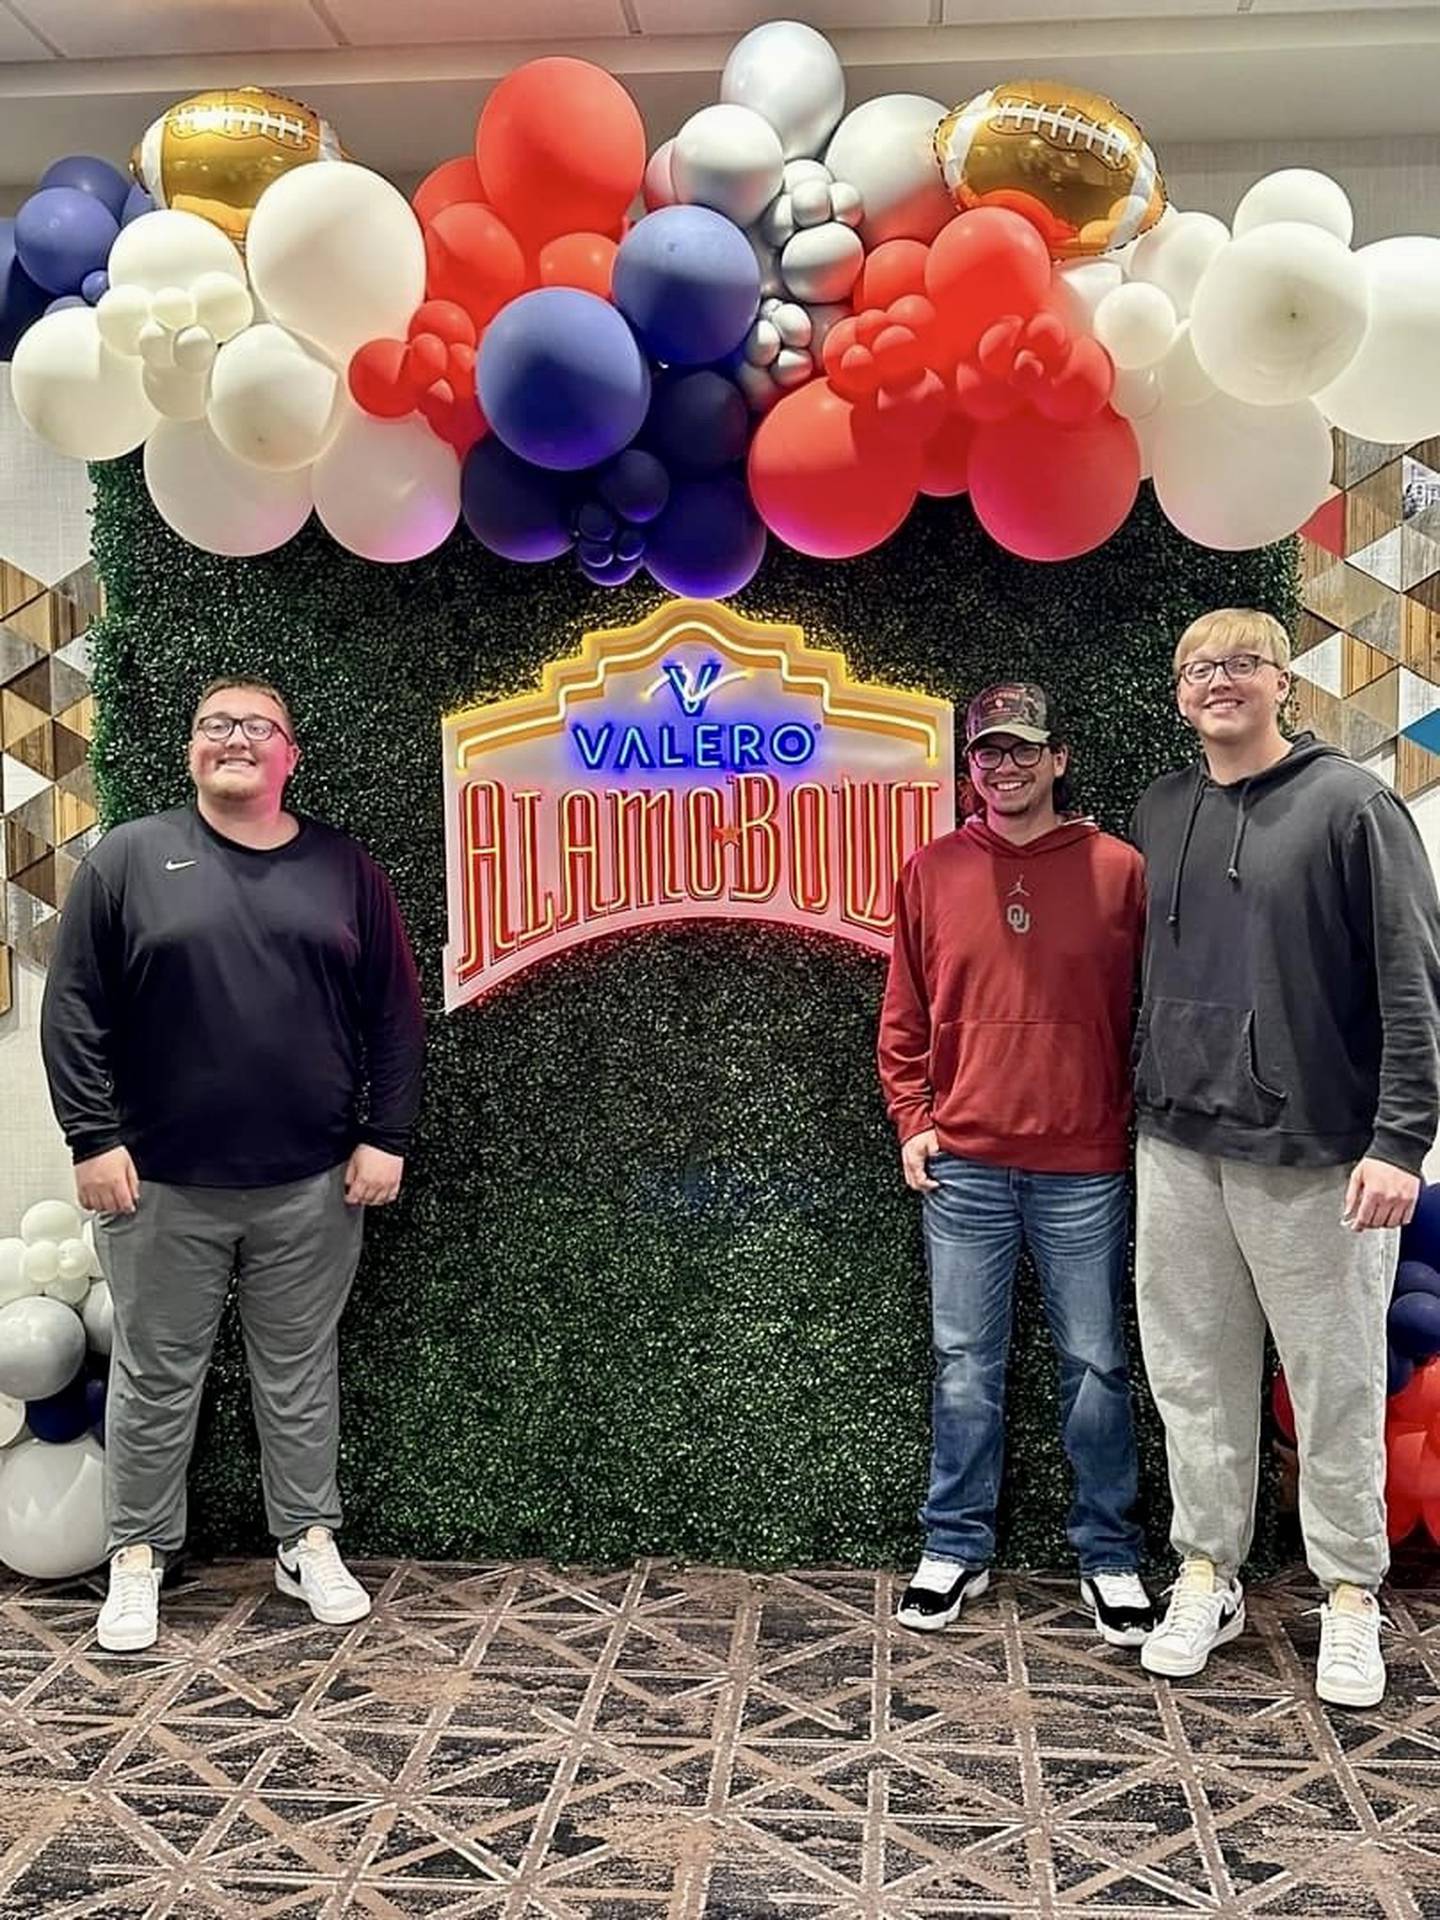 Three former Princeton Tiger teammates Branden Haring (from left), Kaleb Cain and Caleb Haring met up at the Alamo Bowl in San Antonio, Texas. Cain is an equipment manager for Oklahoma and the Haring brothers are  equipment managers for Arizona.